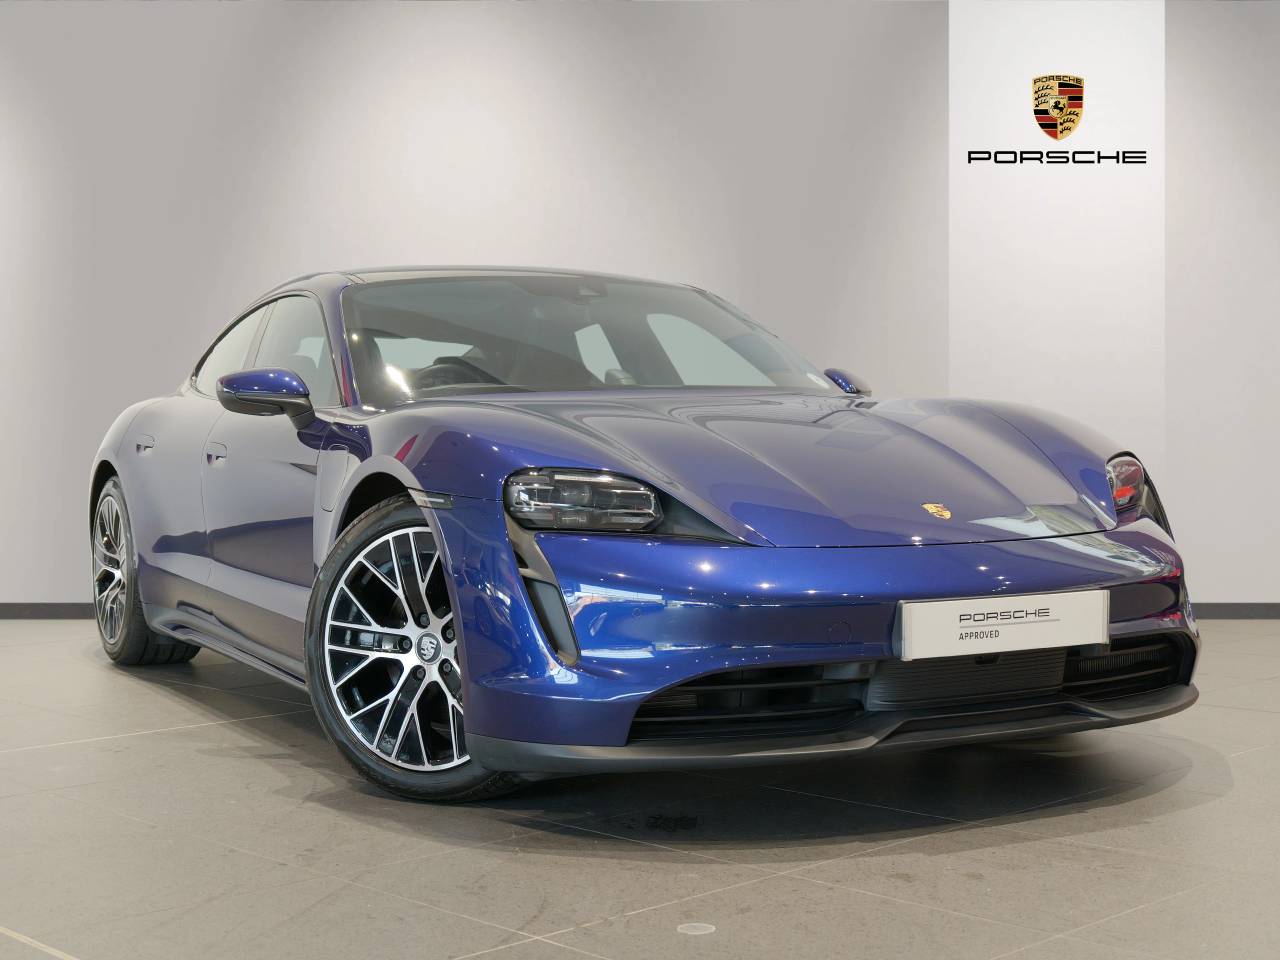 2021 Porsche Taycan 4S (93KWH) Automatic